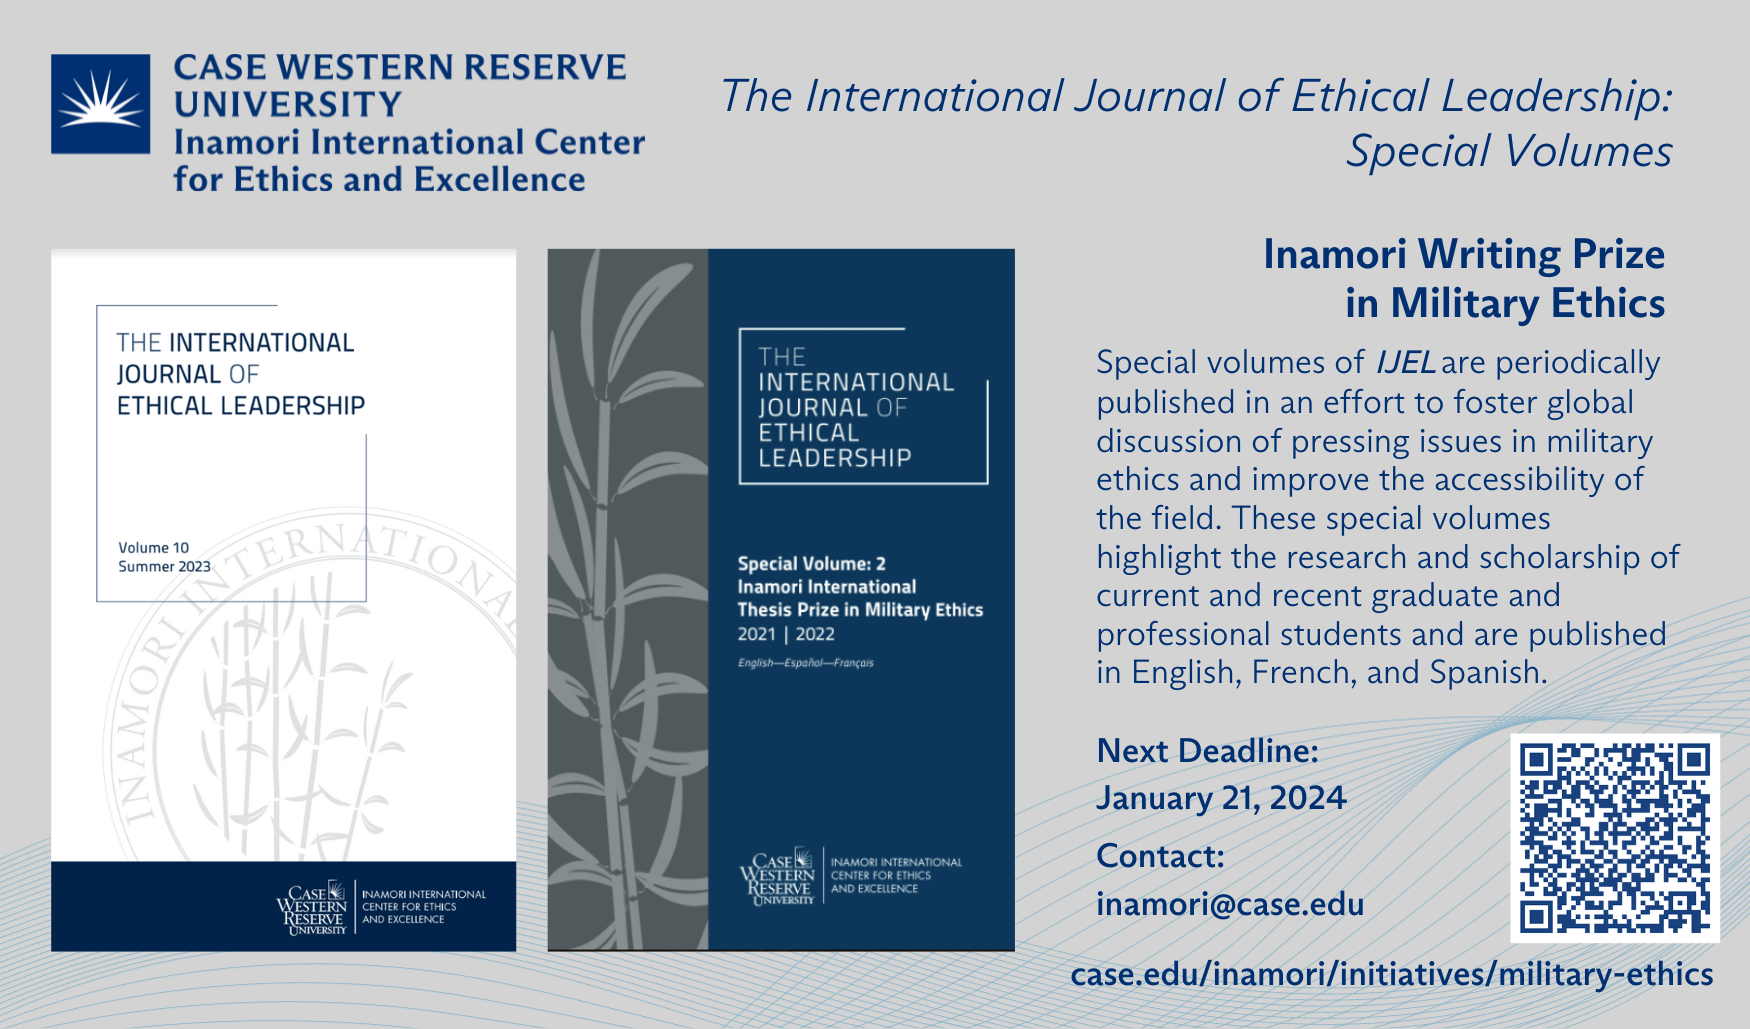 Call for Papers for the Inamori International Writing Prize in Military Ethics to be Published in Special Volume of The International Journal of Ethical Leadership